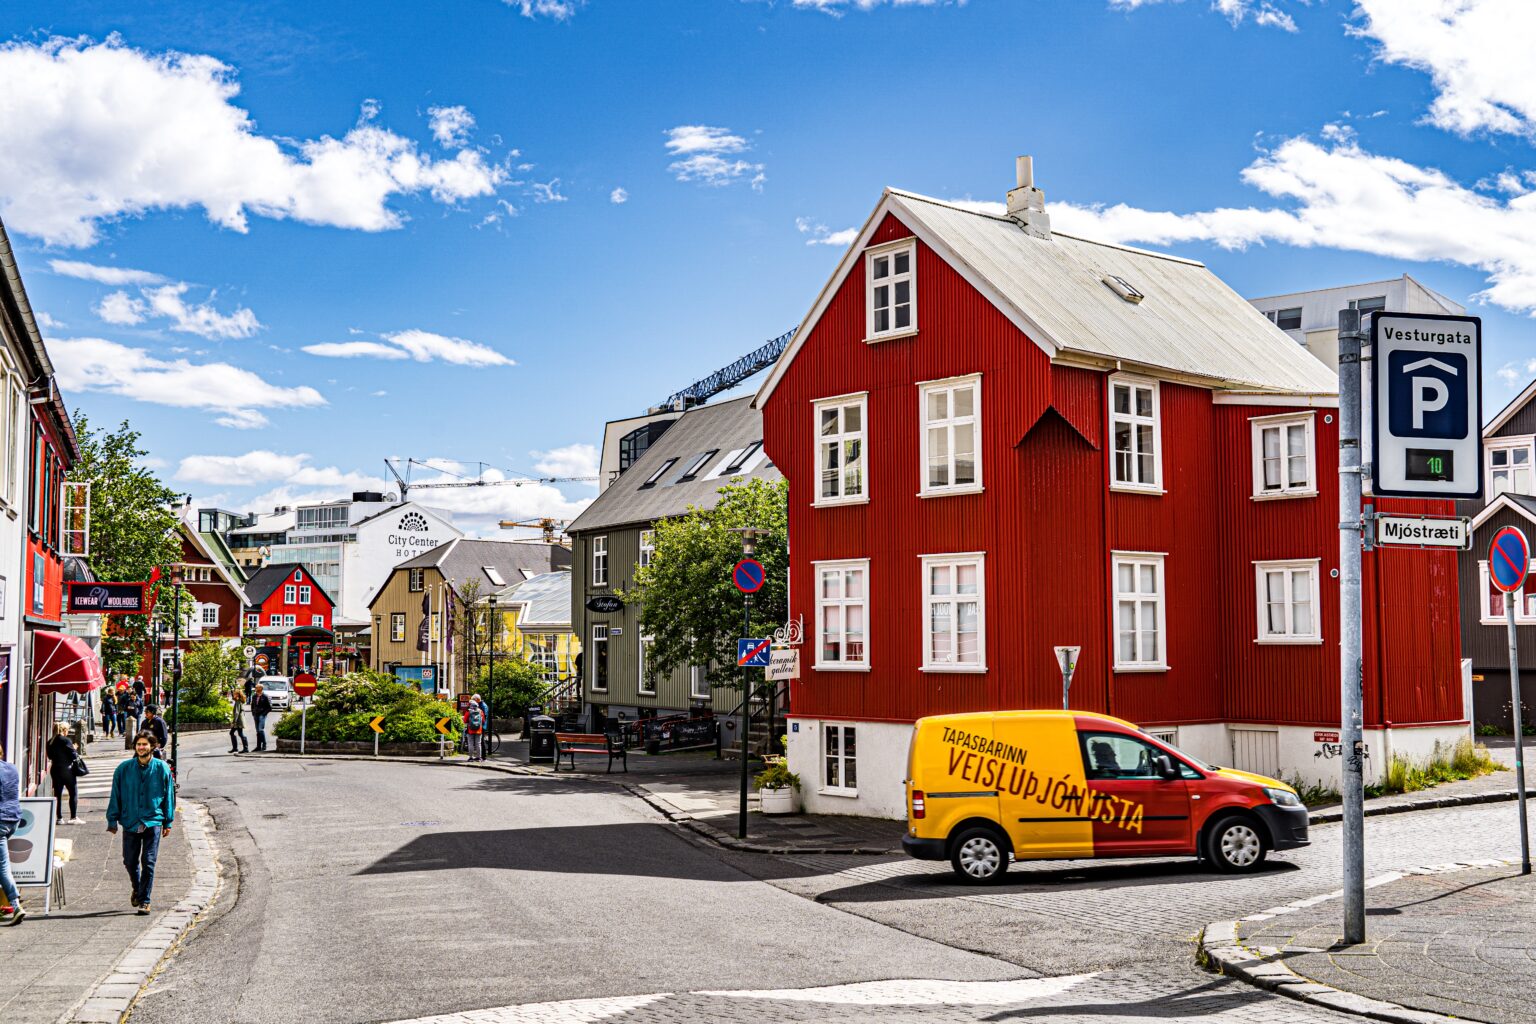 10 must-see attractions for visitors in Reykjavik - Travel Toer